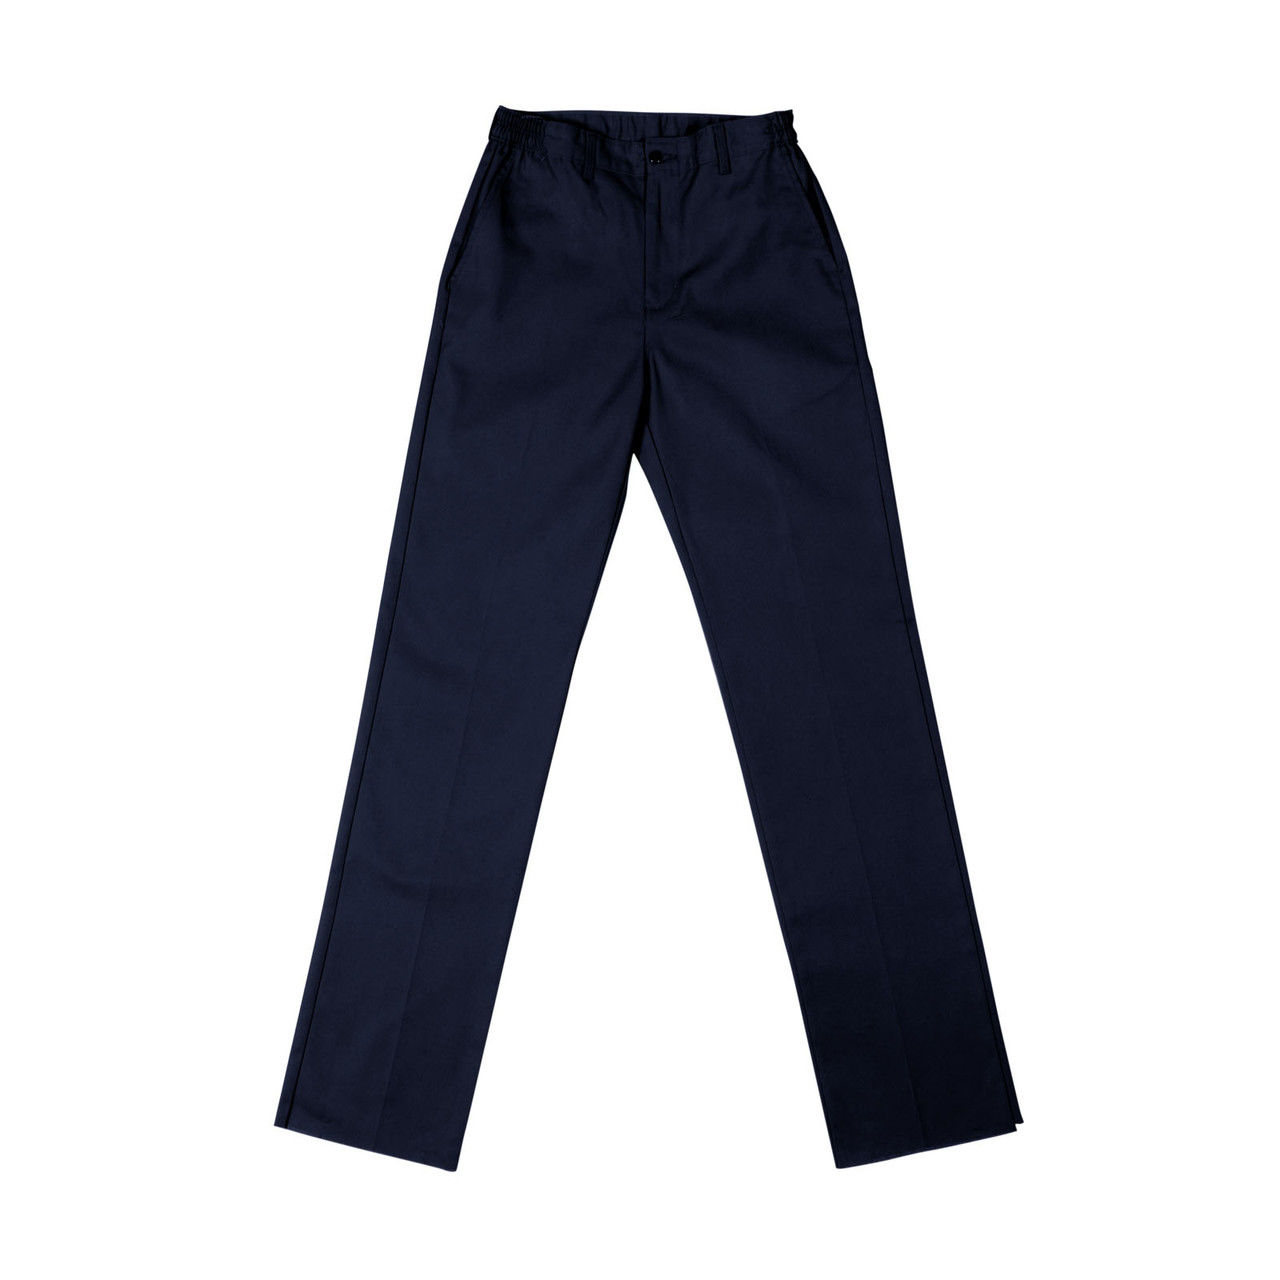 What benefits does the flex-waist provide in these blue work pants for women?